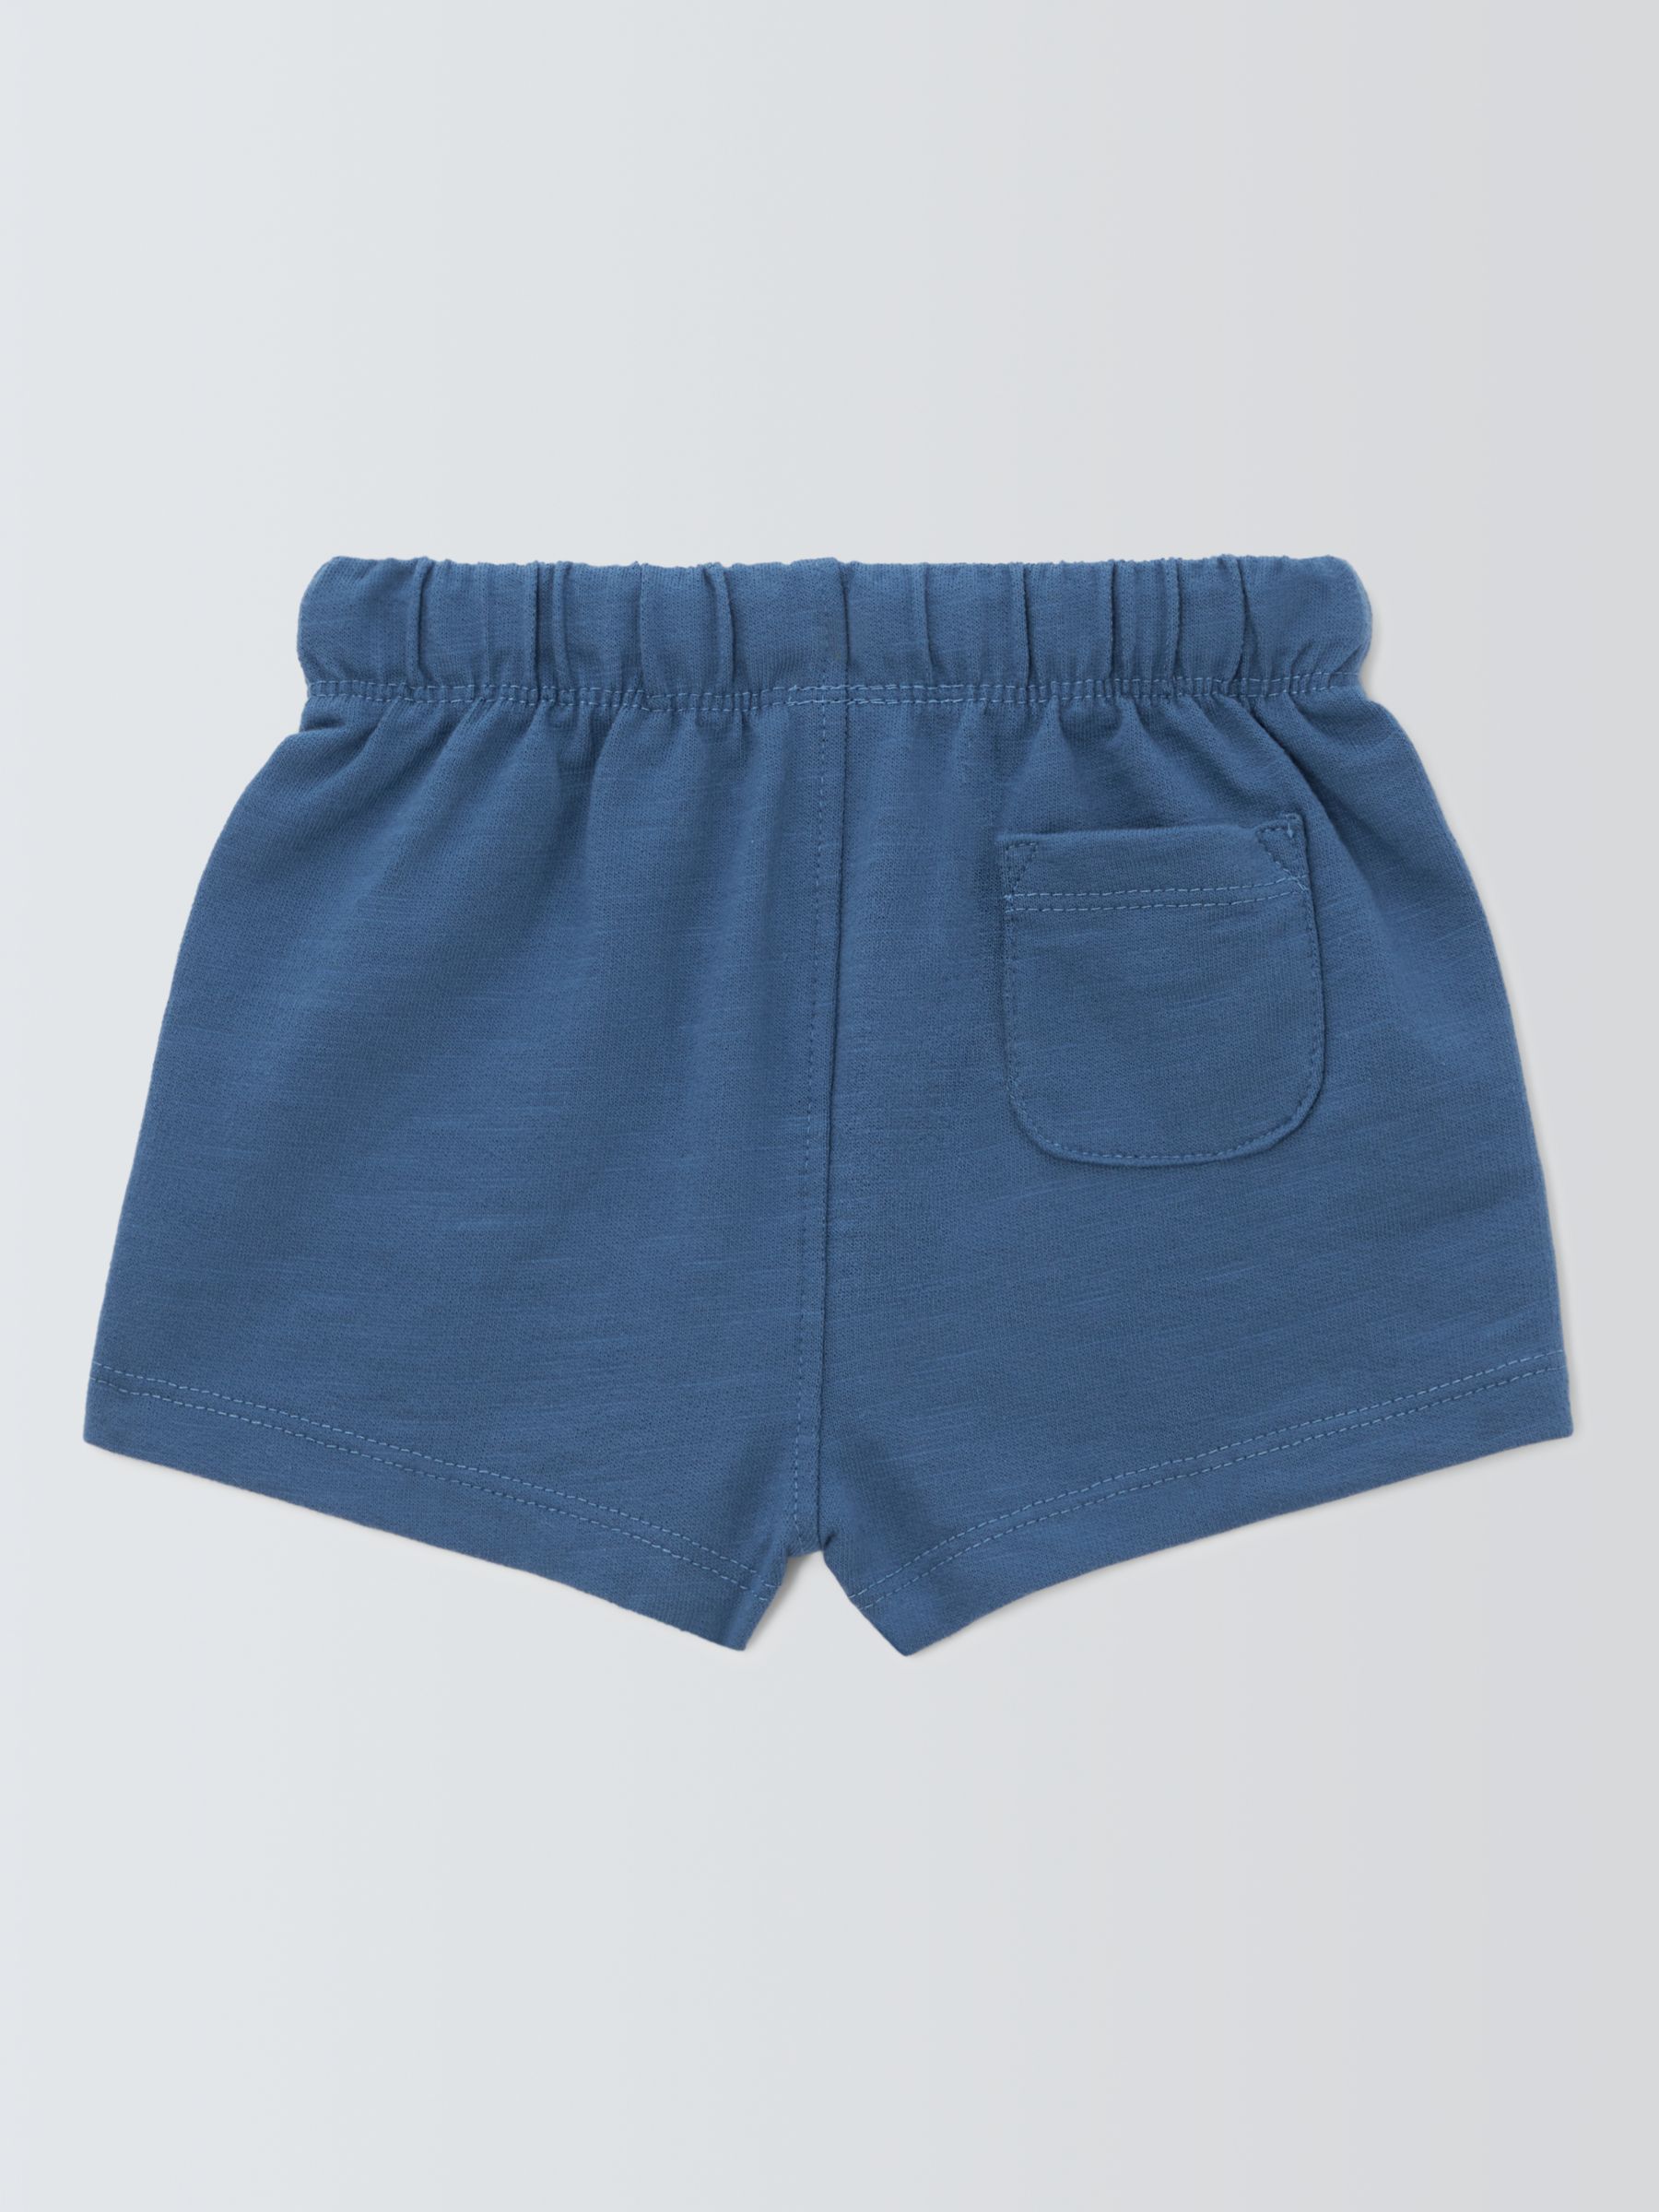 John Lewis ANYDAY Baby Sweat Shorts, Blue, 9-12 months